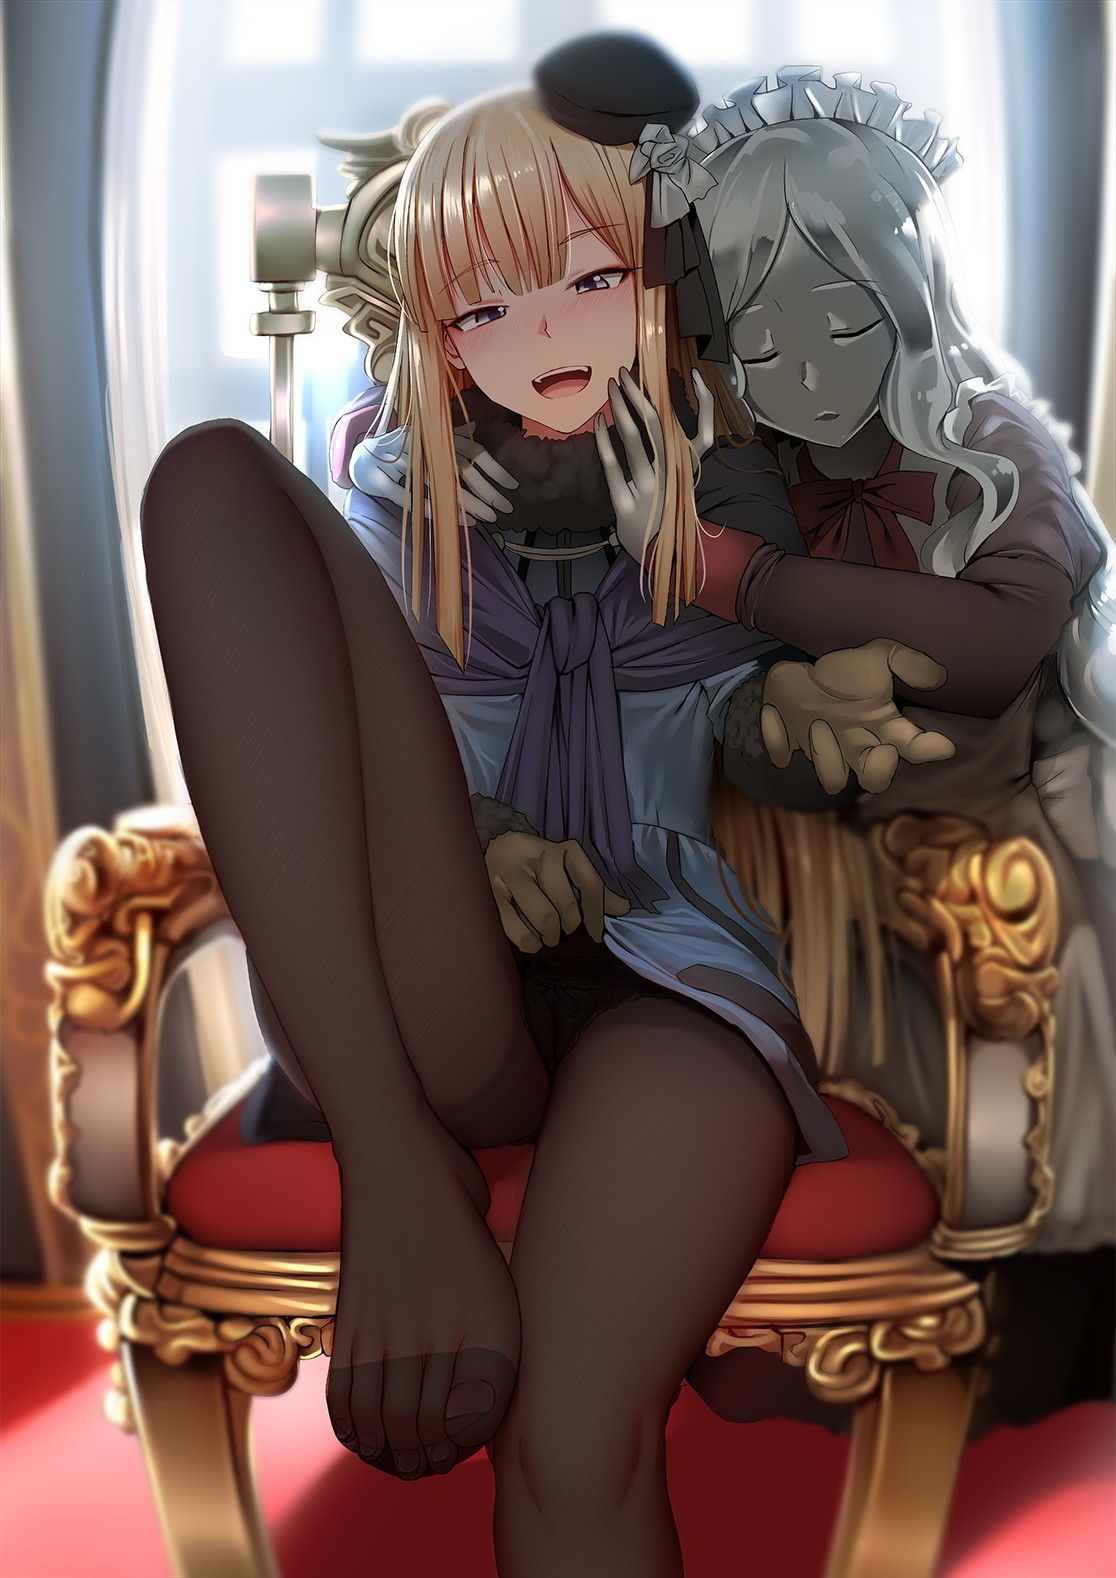 [Case Book of Lord Herme Roy II] Moe &amp; erotic images of Lynes herme Roy Archisolte (Shiba Shibai) ♪ [Fate/Grandorder] 1